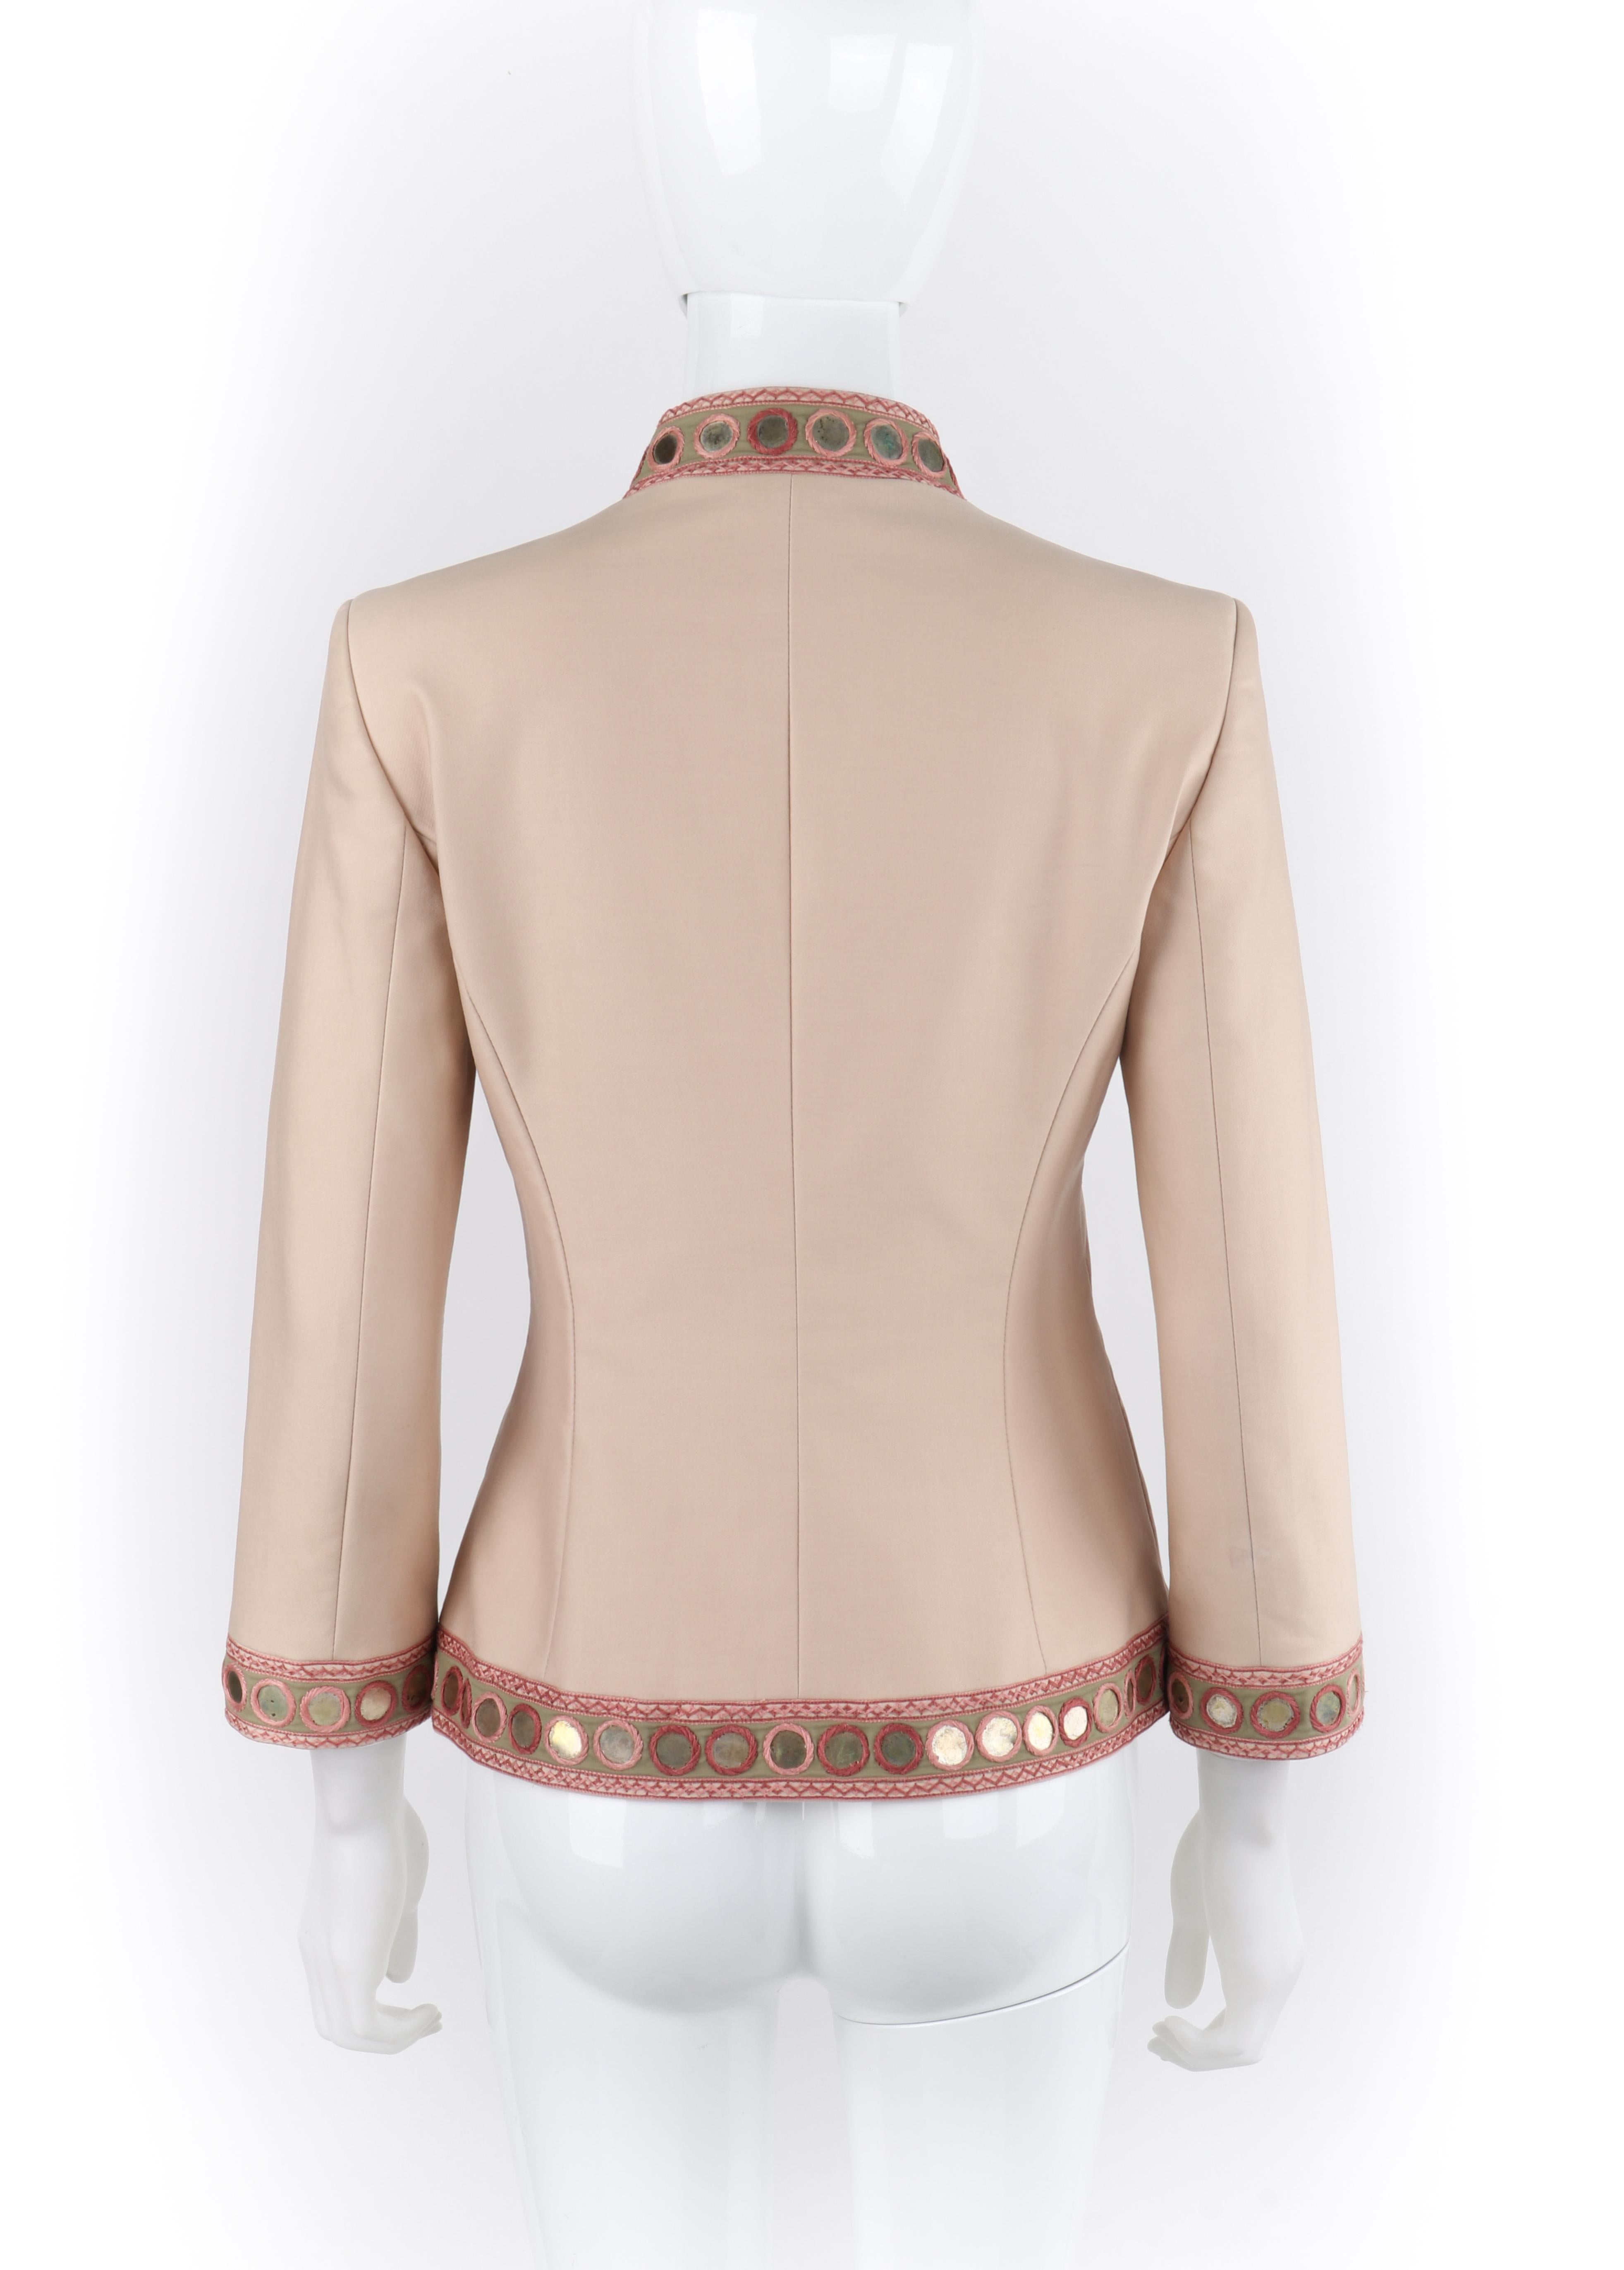 ALEXANDER McQUEEN S/S 2005 Beige Gold Coin Embroidered Collared Button Up Jacket For Sale 2